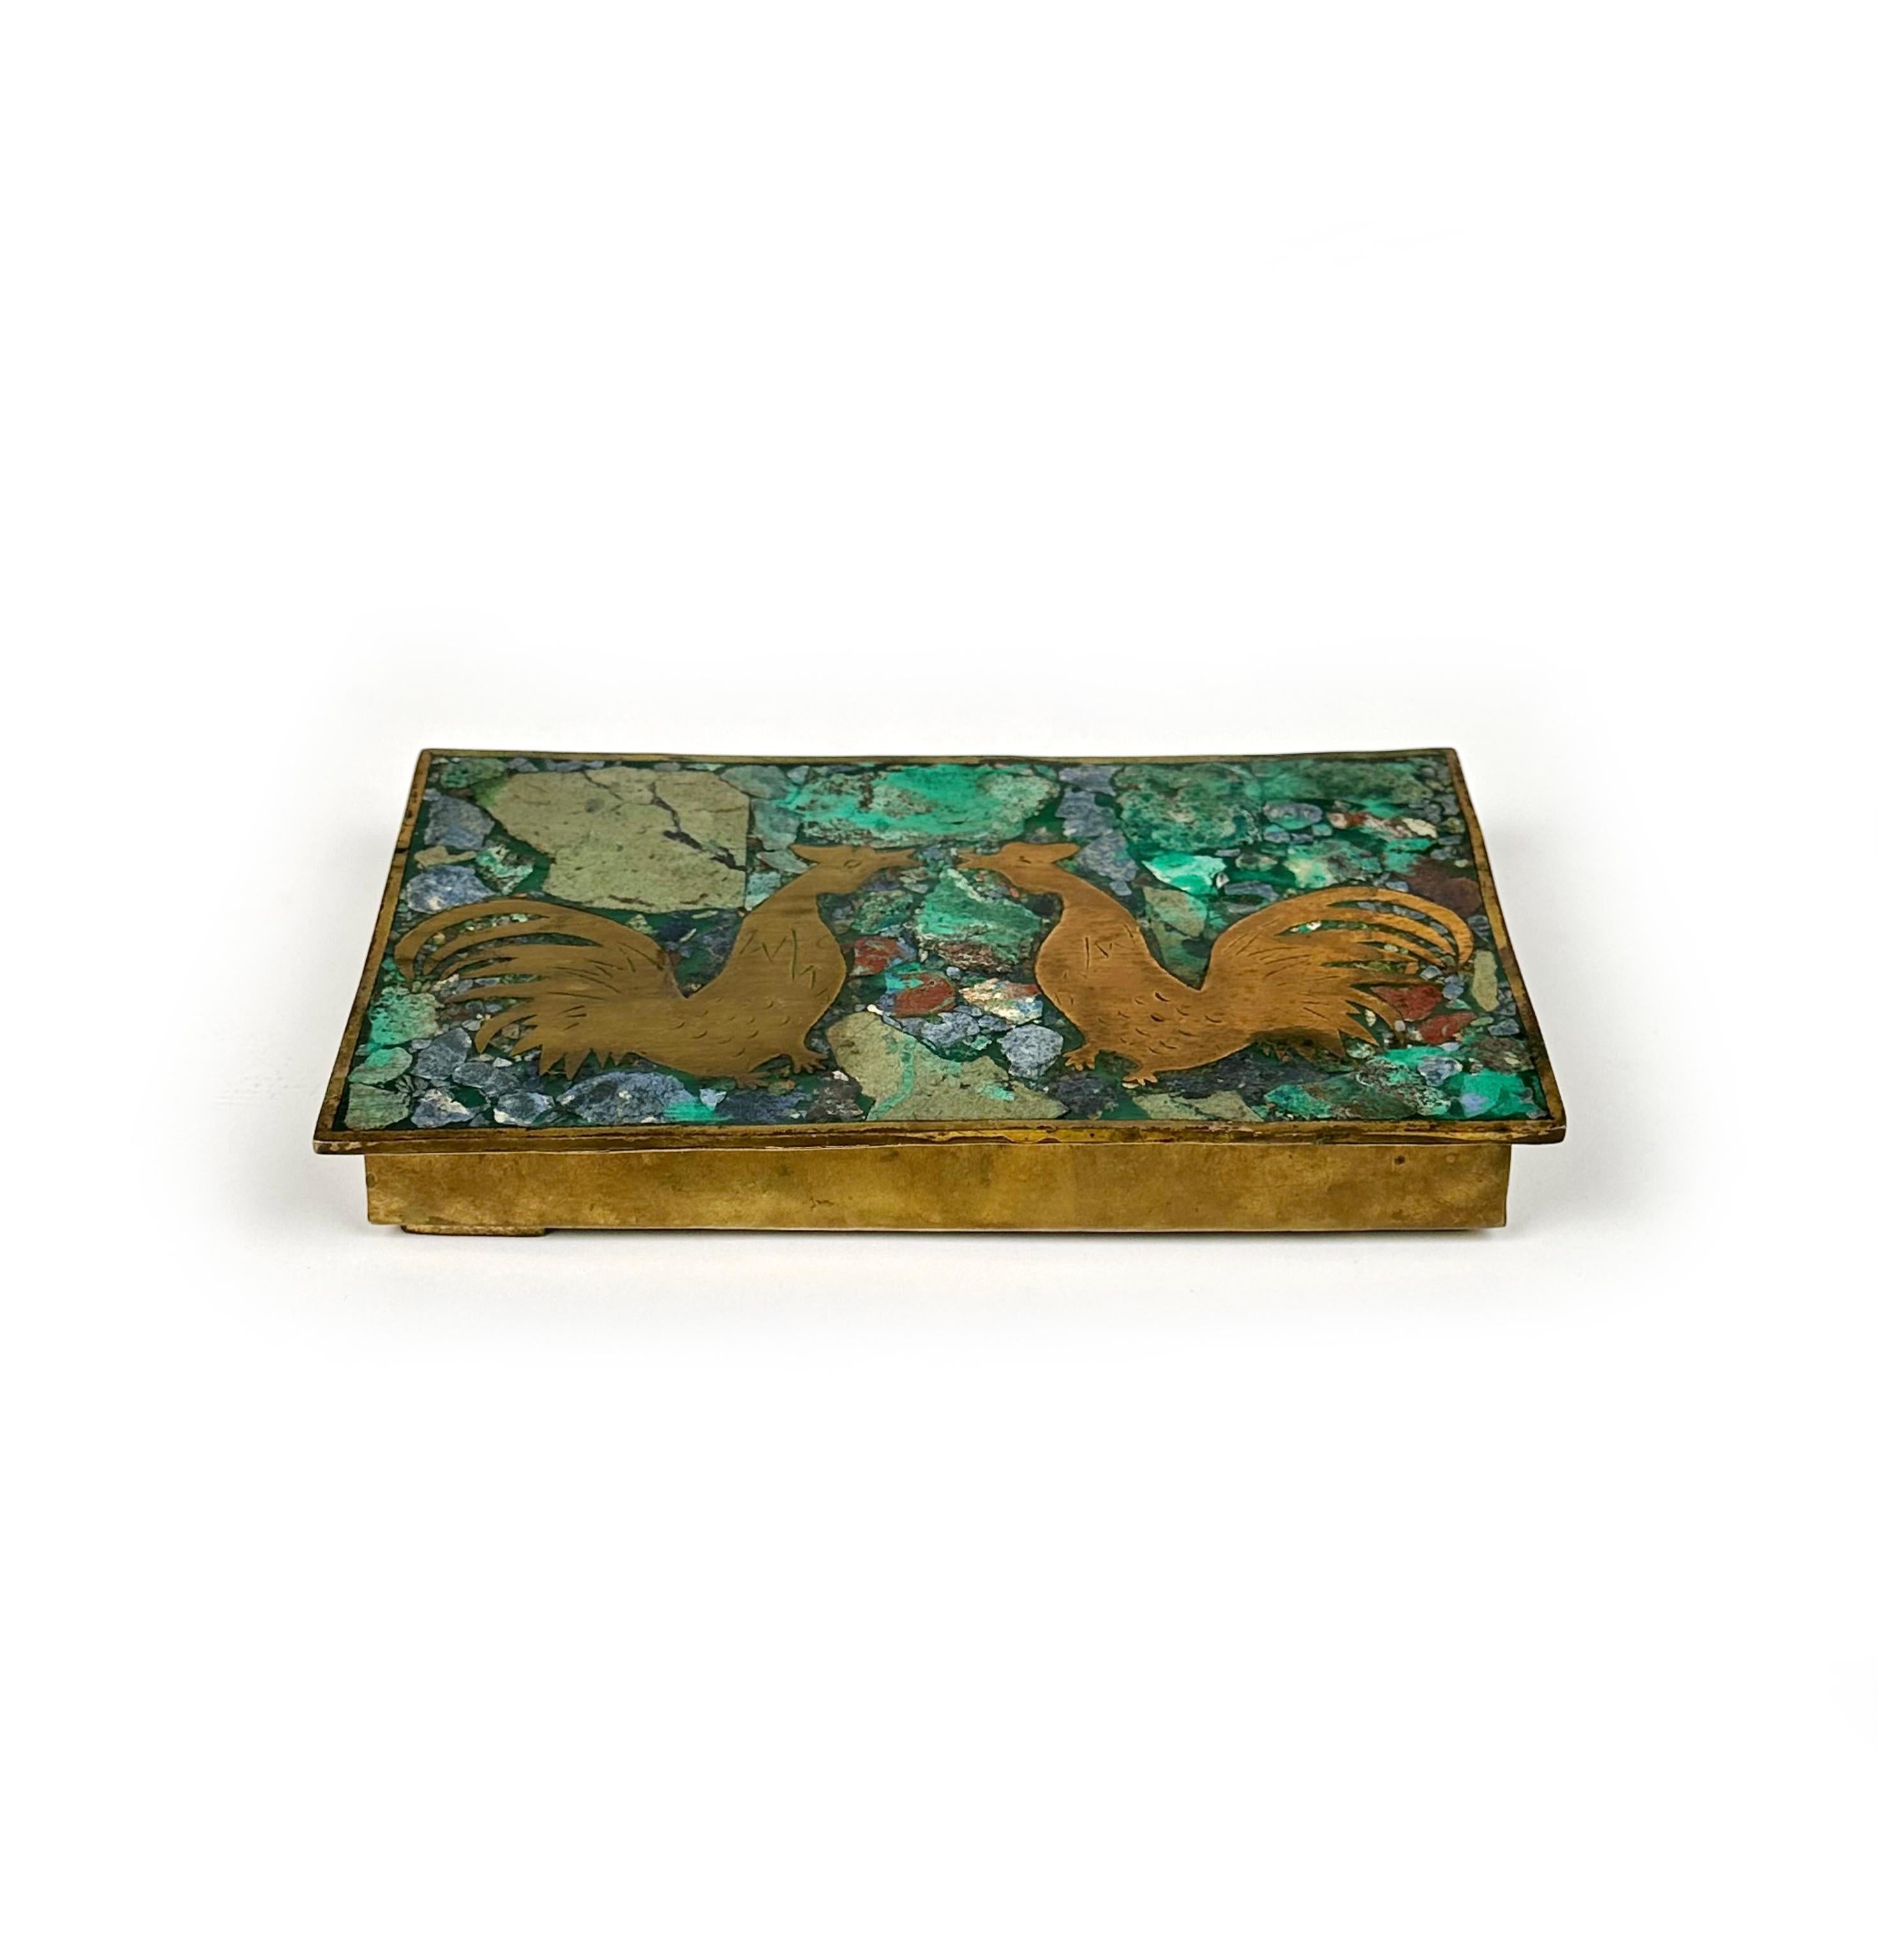 Beautiful hinged inlaid malachite and sodalite (or lapis lazuli) brass metal box with wood interior. 

Two roosters grace the lid. The metalsmiths of Taxco, Mexico were known for producing this type of cigar box in the 1960s.

Made in Mexico in